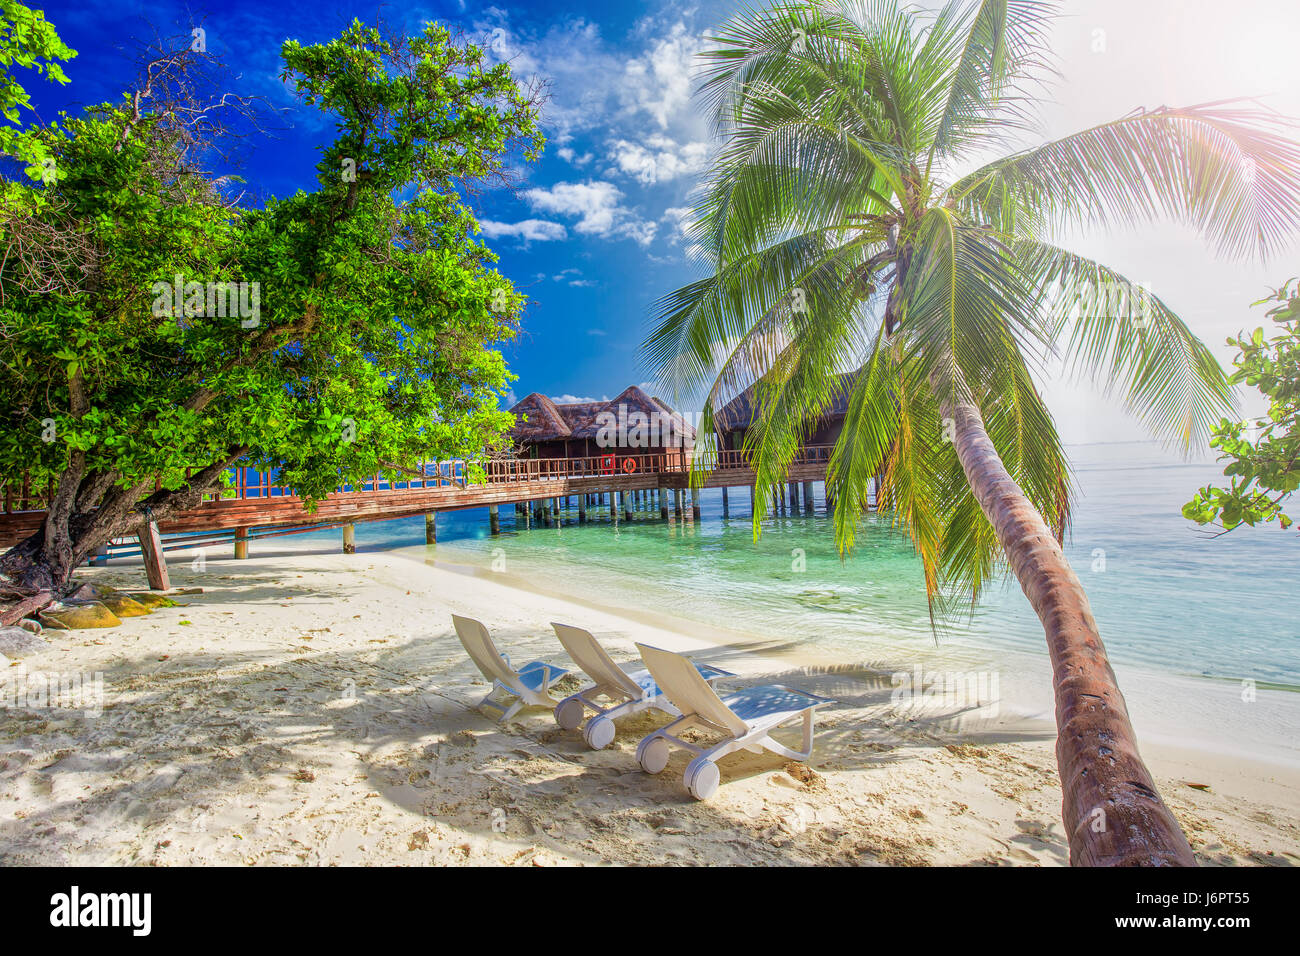 Palm tree on tropical island with turquoise clear water and overwater bungalow, Maldives Stock Photo